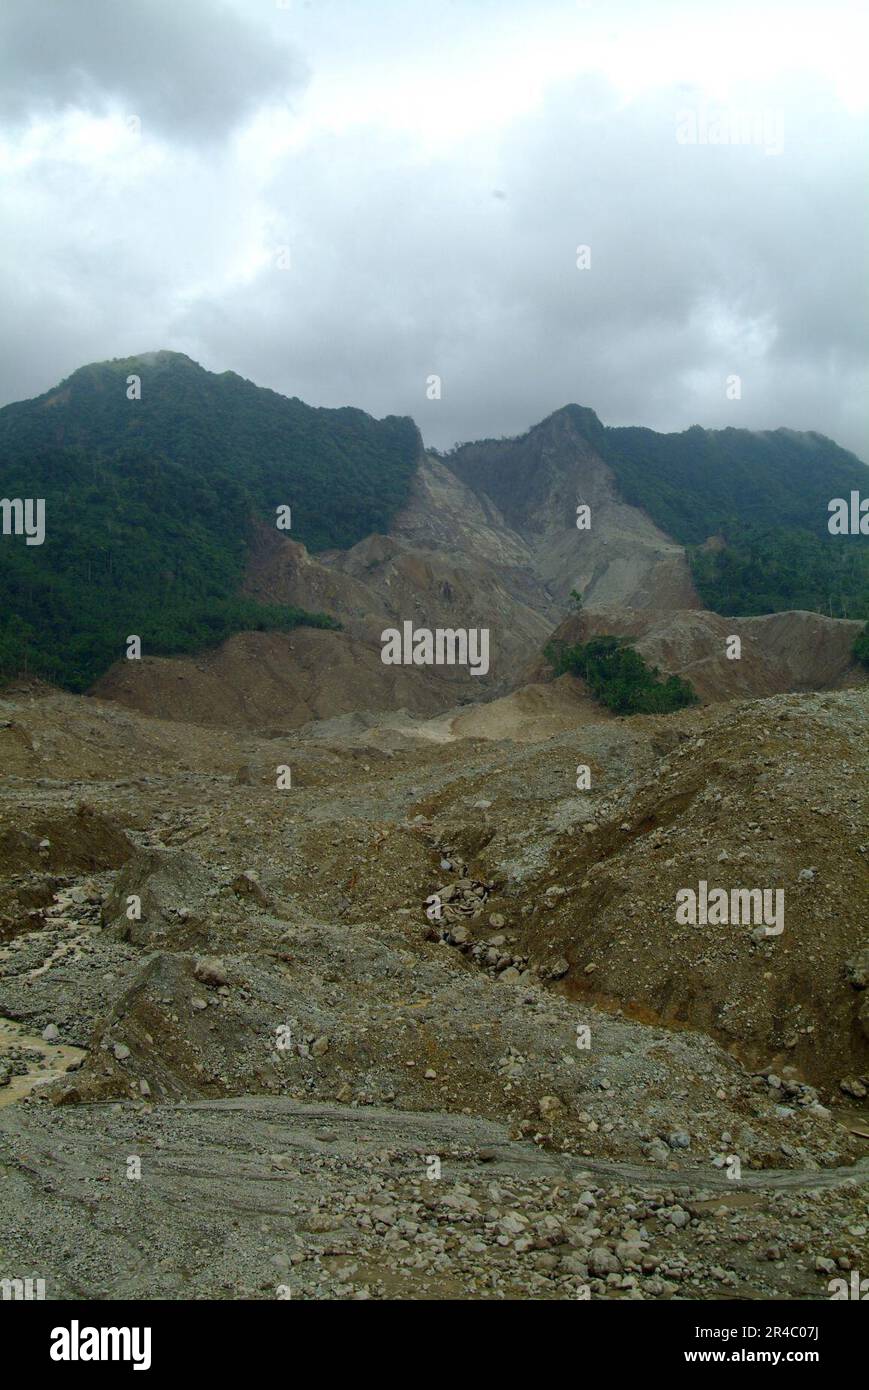 US Navy  A view of the mudslide, which destroyed the town of Guinsahugon the morning of Feb. 17. Guinsahugon is located in the southern part of the island of Leyte in the Philippines. Stock Photo